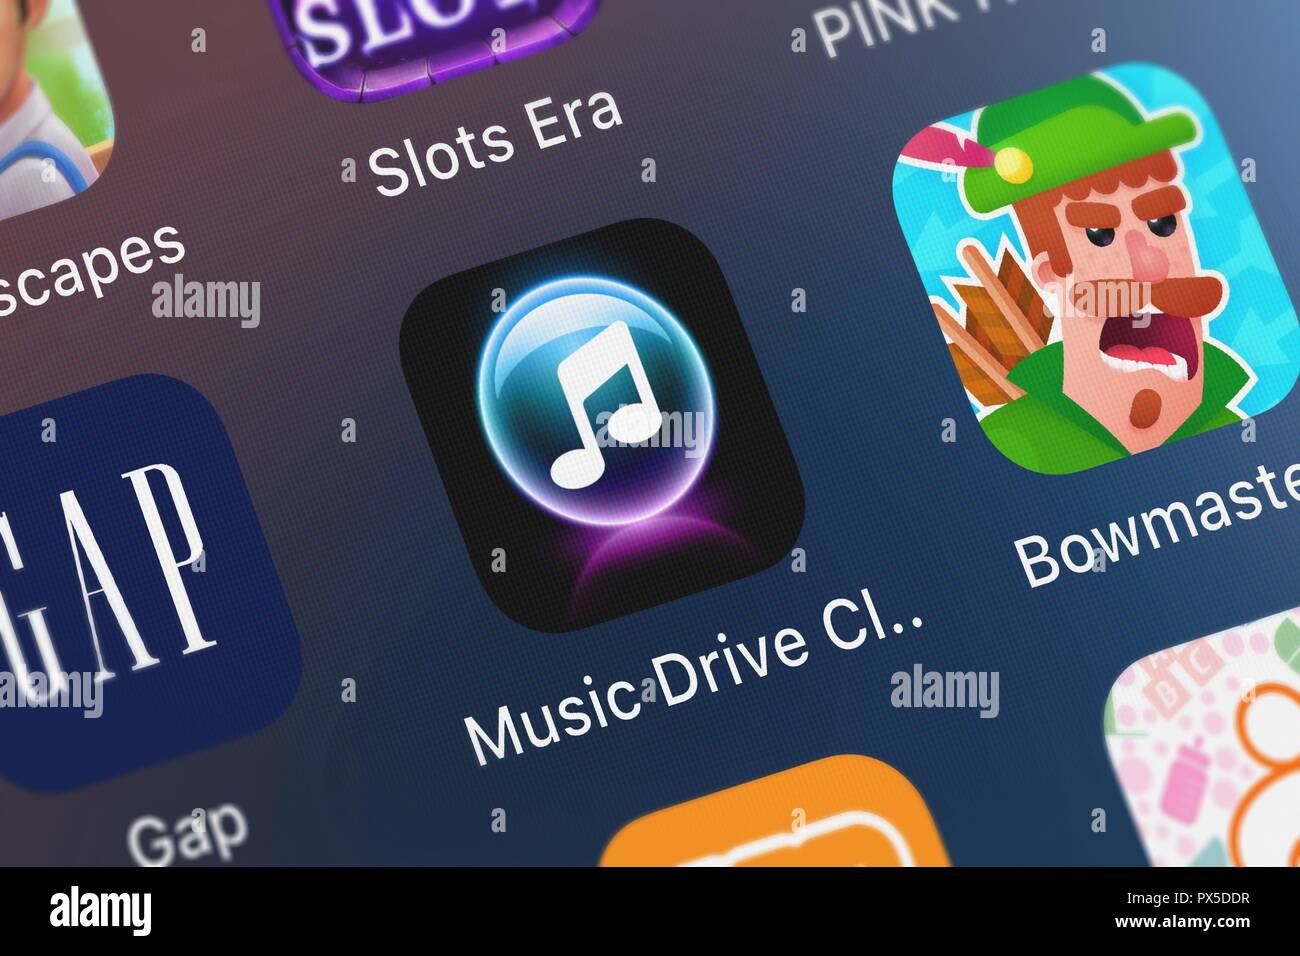 London, United Kingdom - October 19, 2018: Close-up of the Music Drive:Cloud music player icon from Dajax LLC on an iPhone. Stock Photo